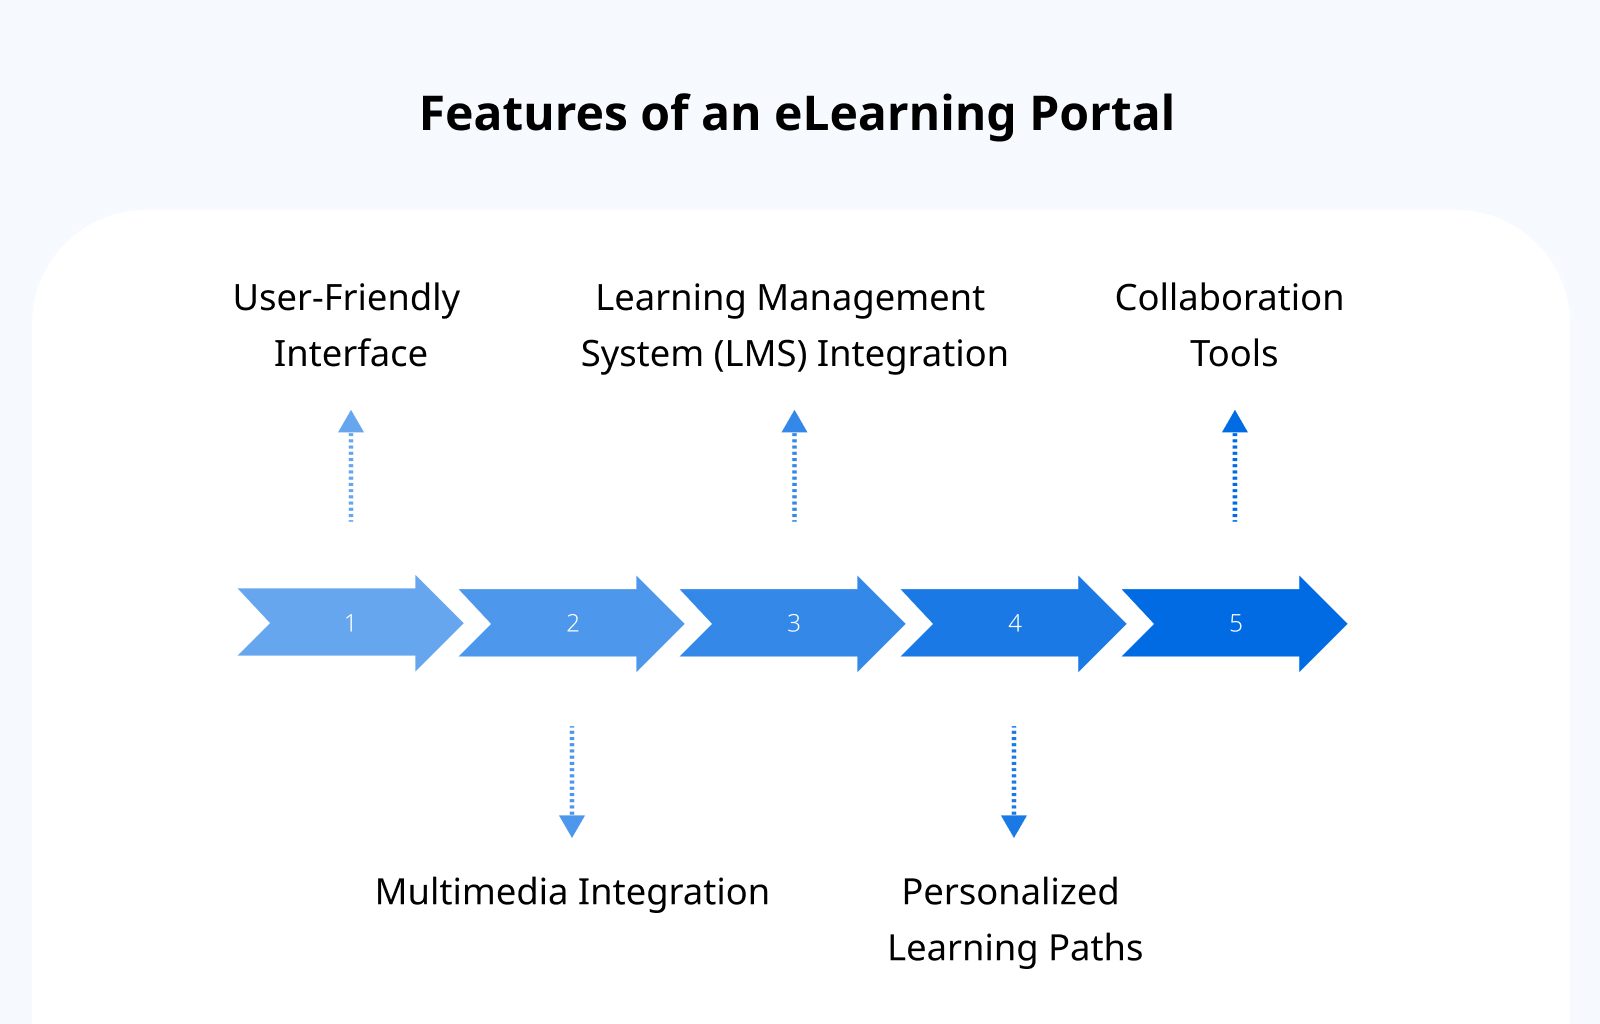 Features of an eLearning Portal